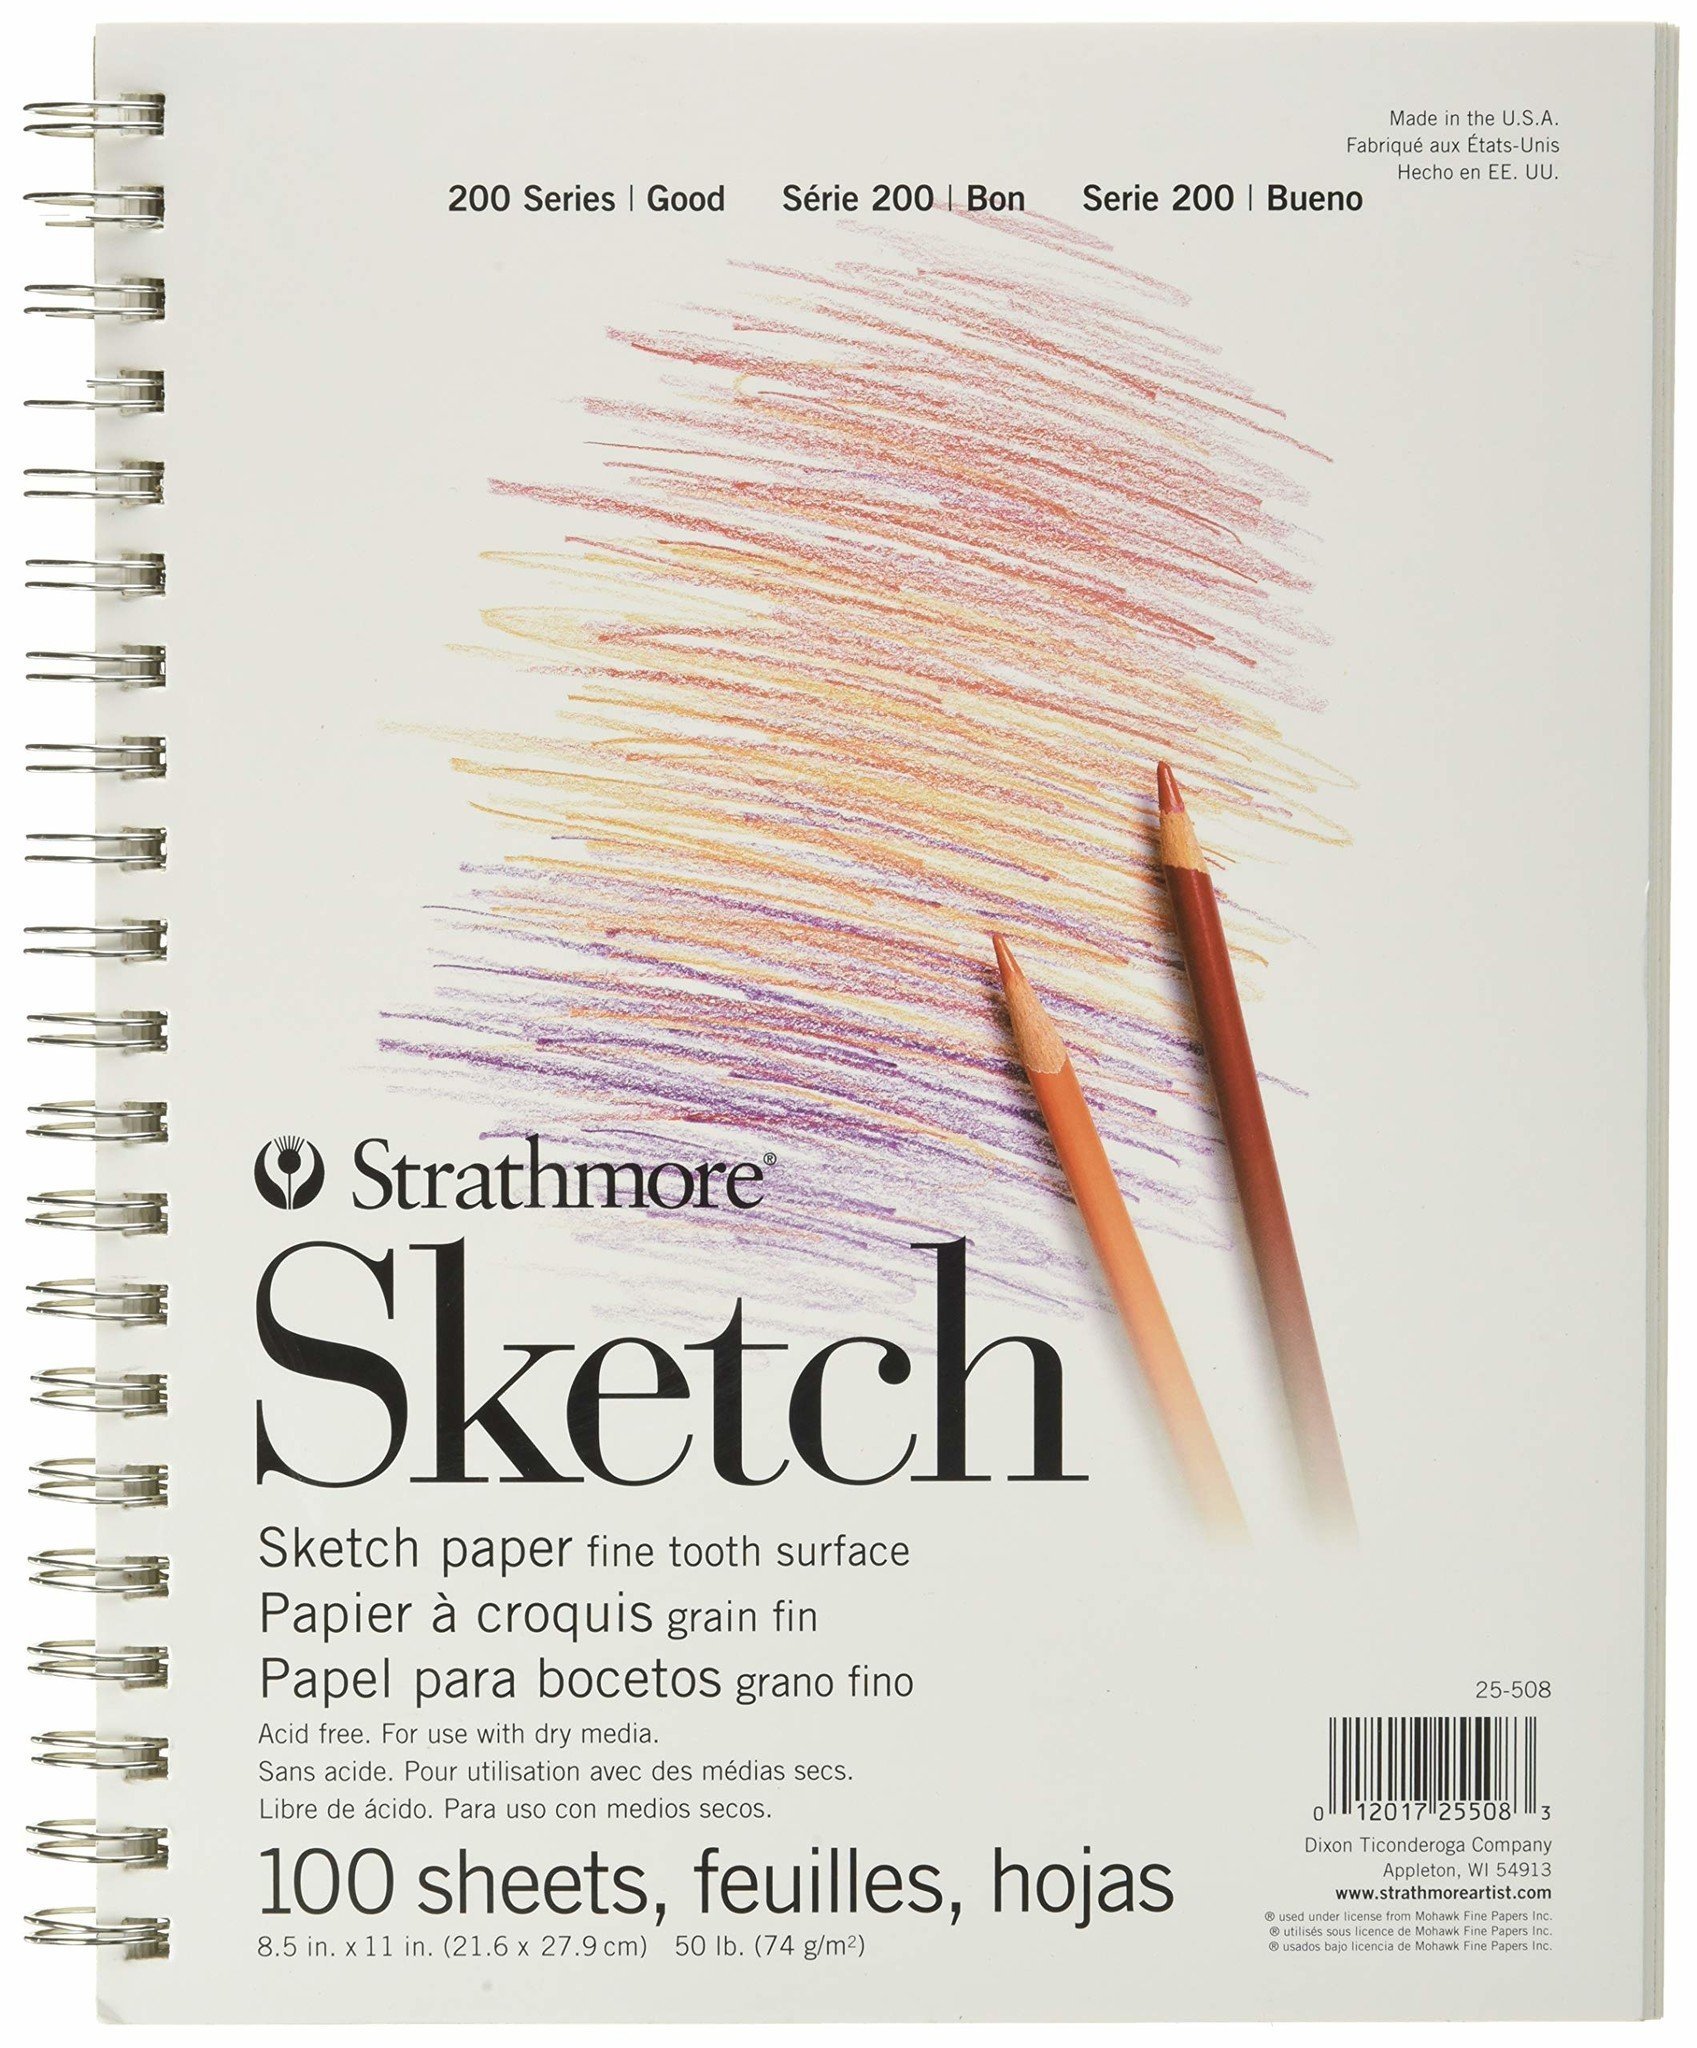 Kokuyo Trystrams Field Sketch Book Review — The Pen Addict